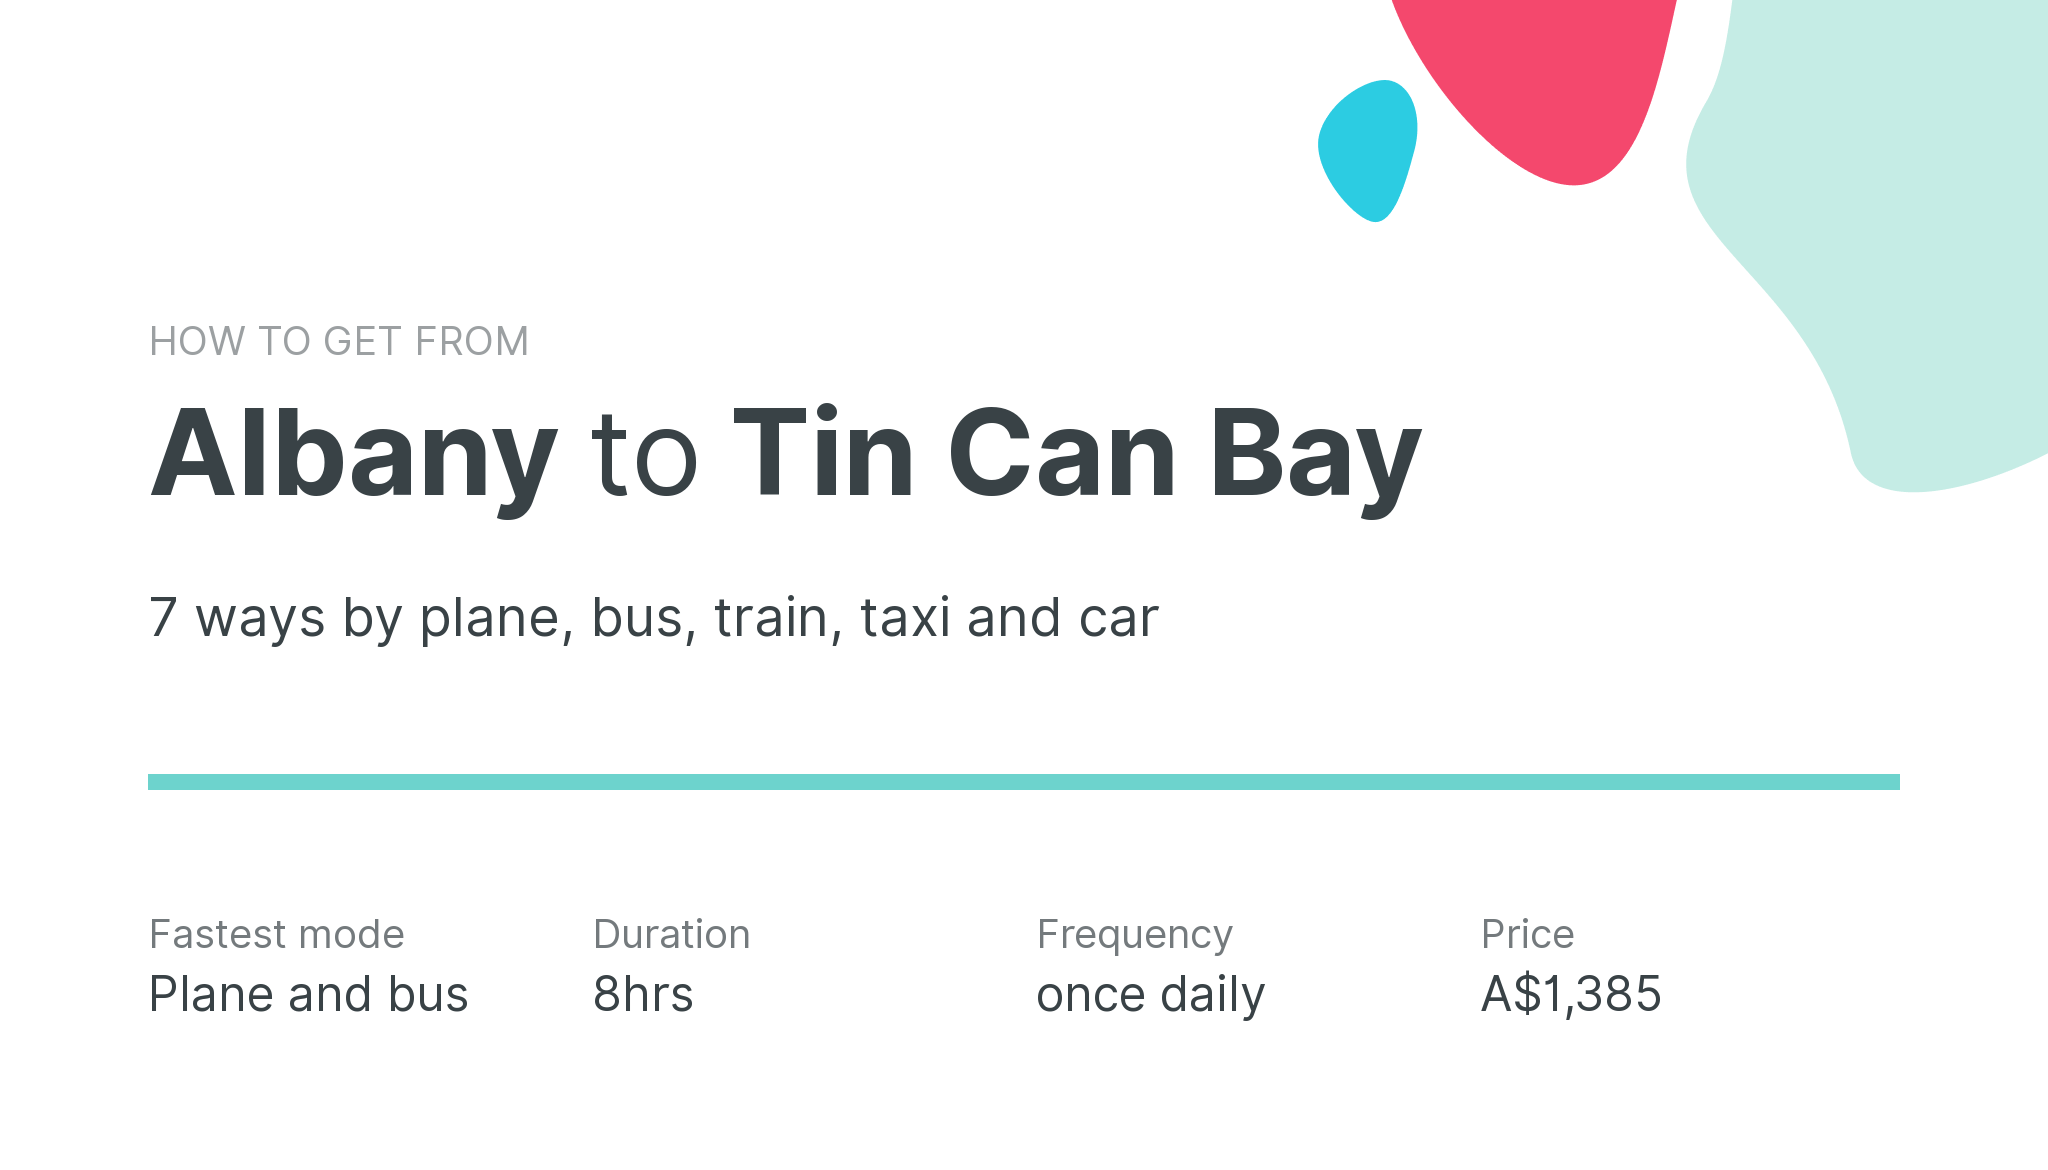 How do I get from Albany to Tin Can Bay